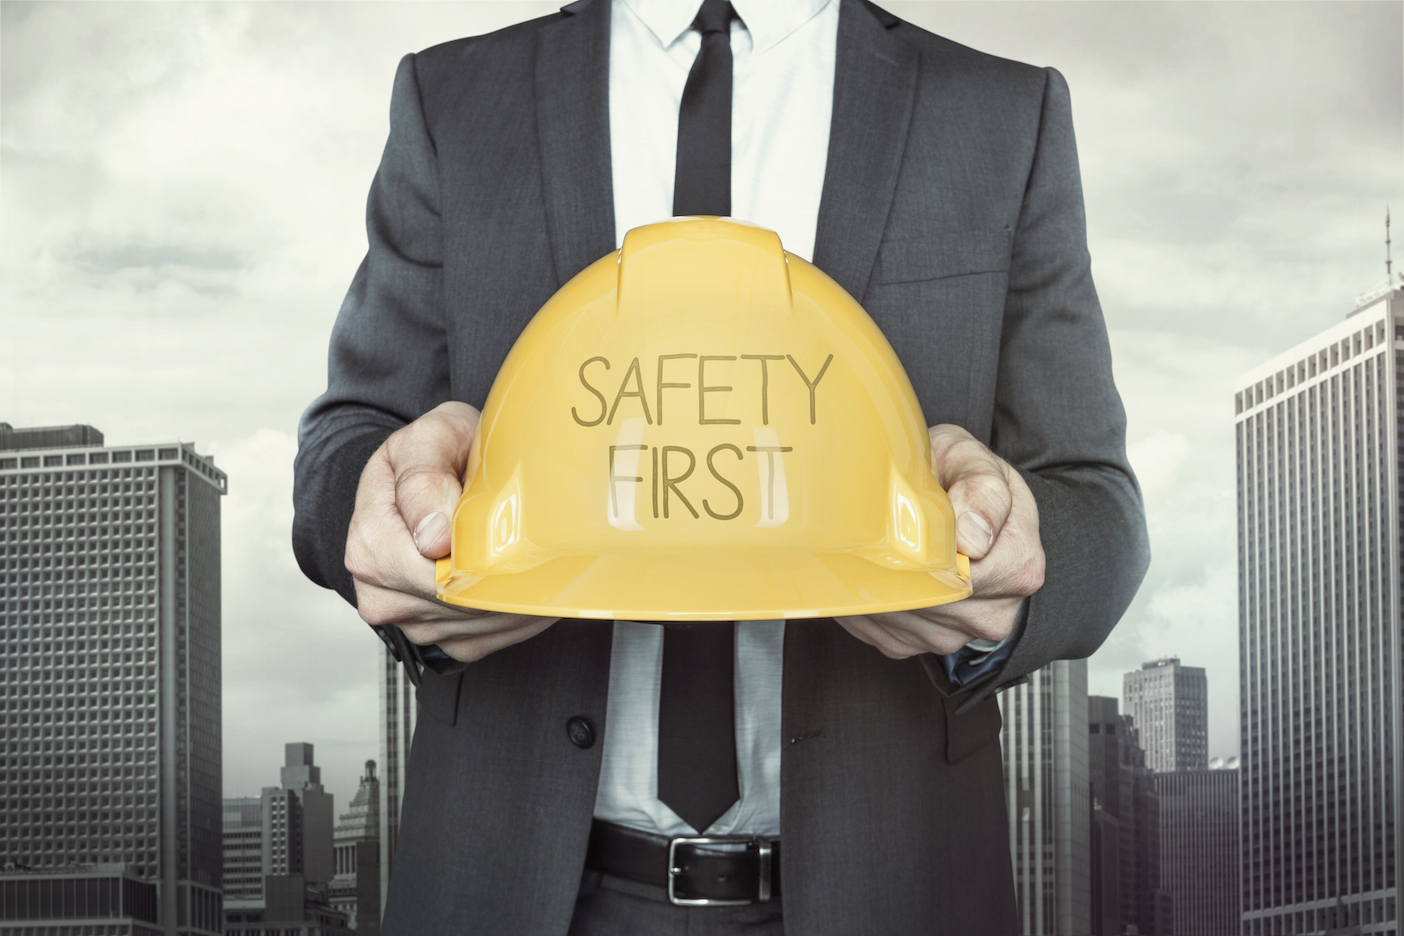 Who keeps you safe when Health and Safety professionals are bullied?